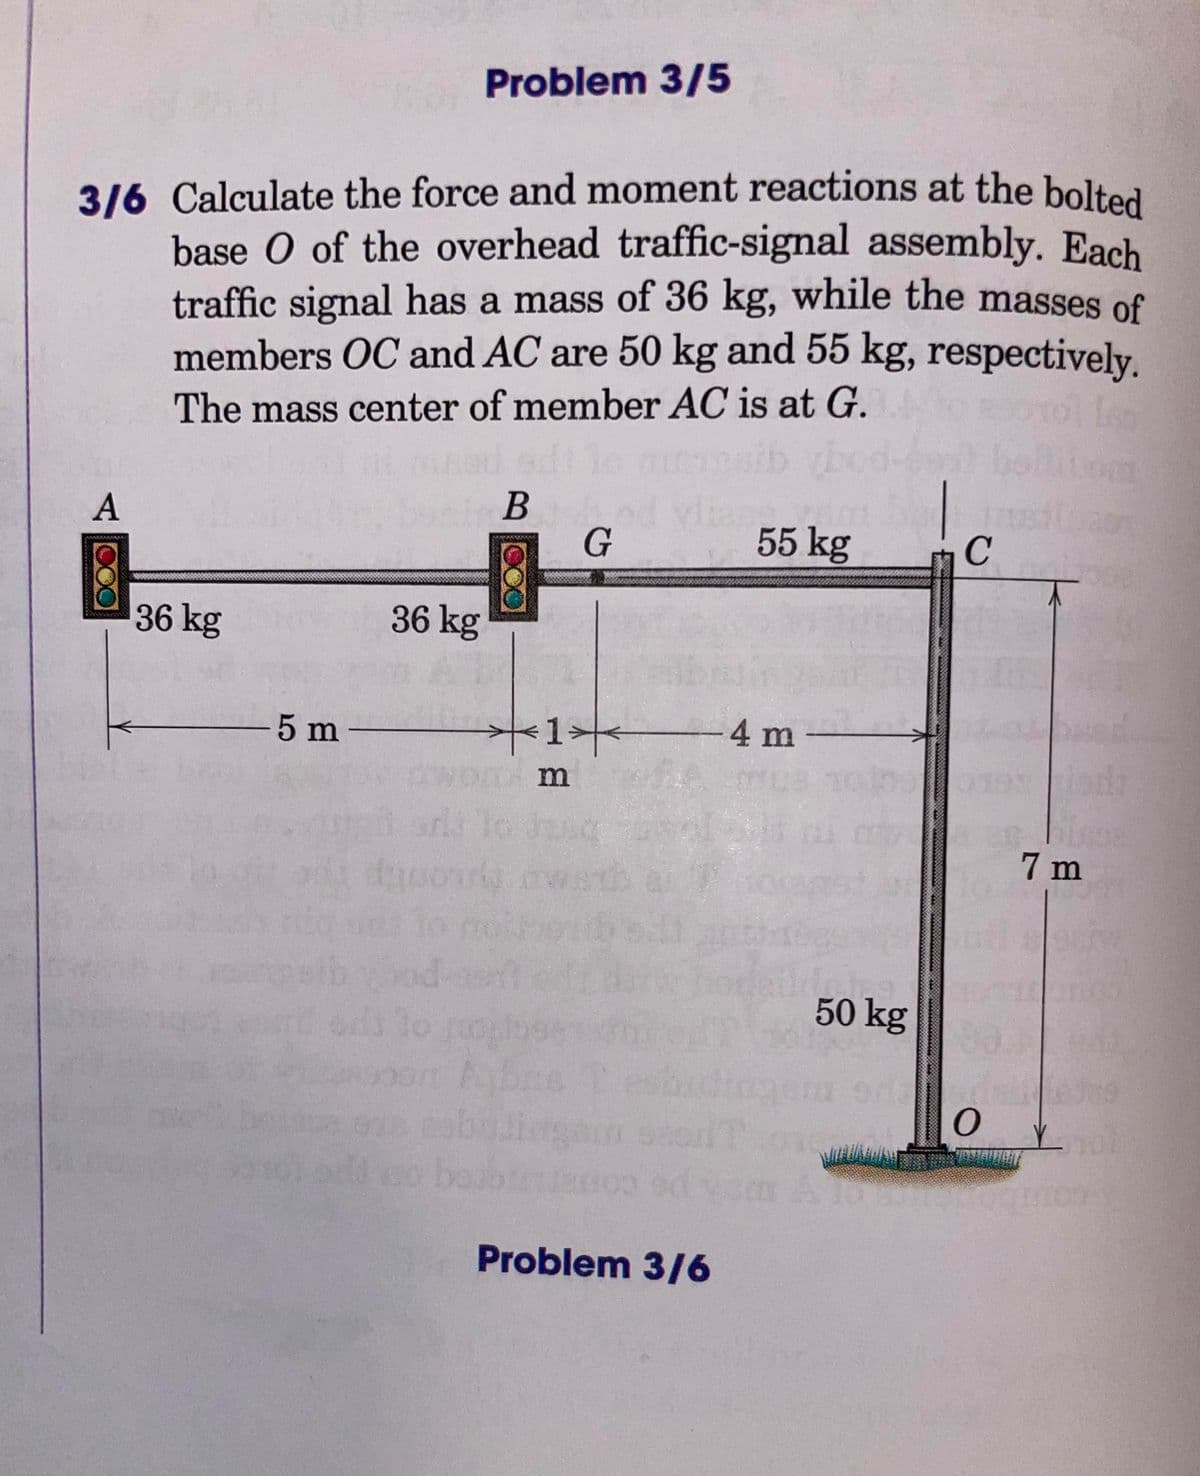 Problem 3/5
3/6 Calculate the force and moment reactions at the bolted
base O of the overhead traffic-signal assembly. Each
traffic signal has a mass of 36 kg, while the masses of
members OC and AC are 50 kg and 55 kg, respectively.
The mass center of member AC is at G.
b ybod-e bol
B d vian
G
A
55 kg
C
36 kg
36 kg
5 m
-4 m
arl lo d
7 m
50 kg
1o o
eo be
Problem 3/6
